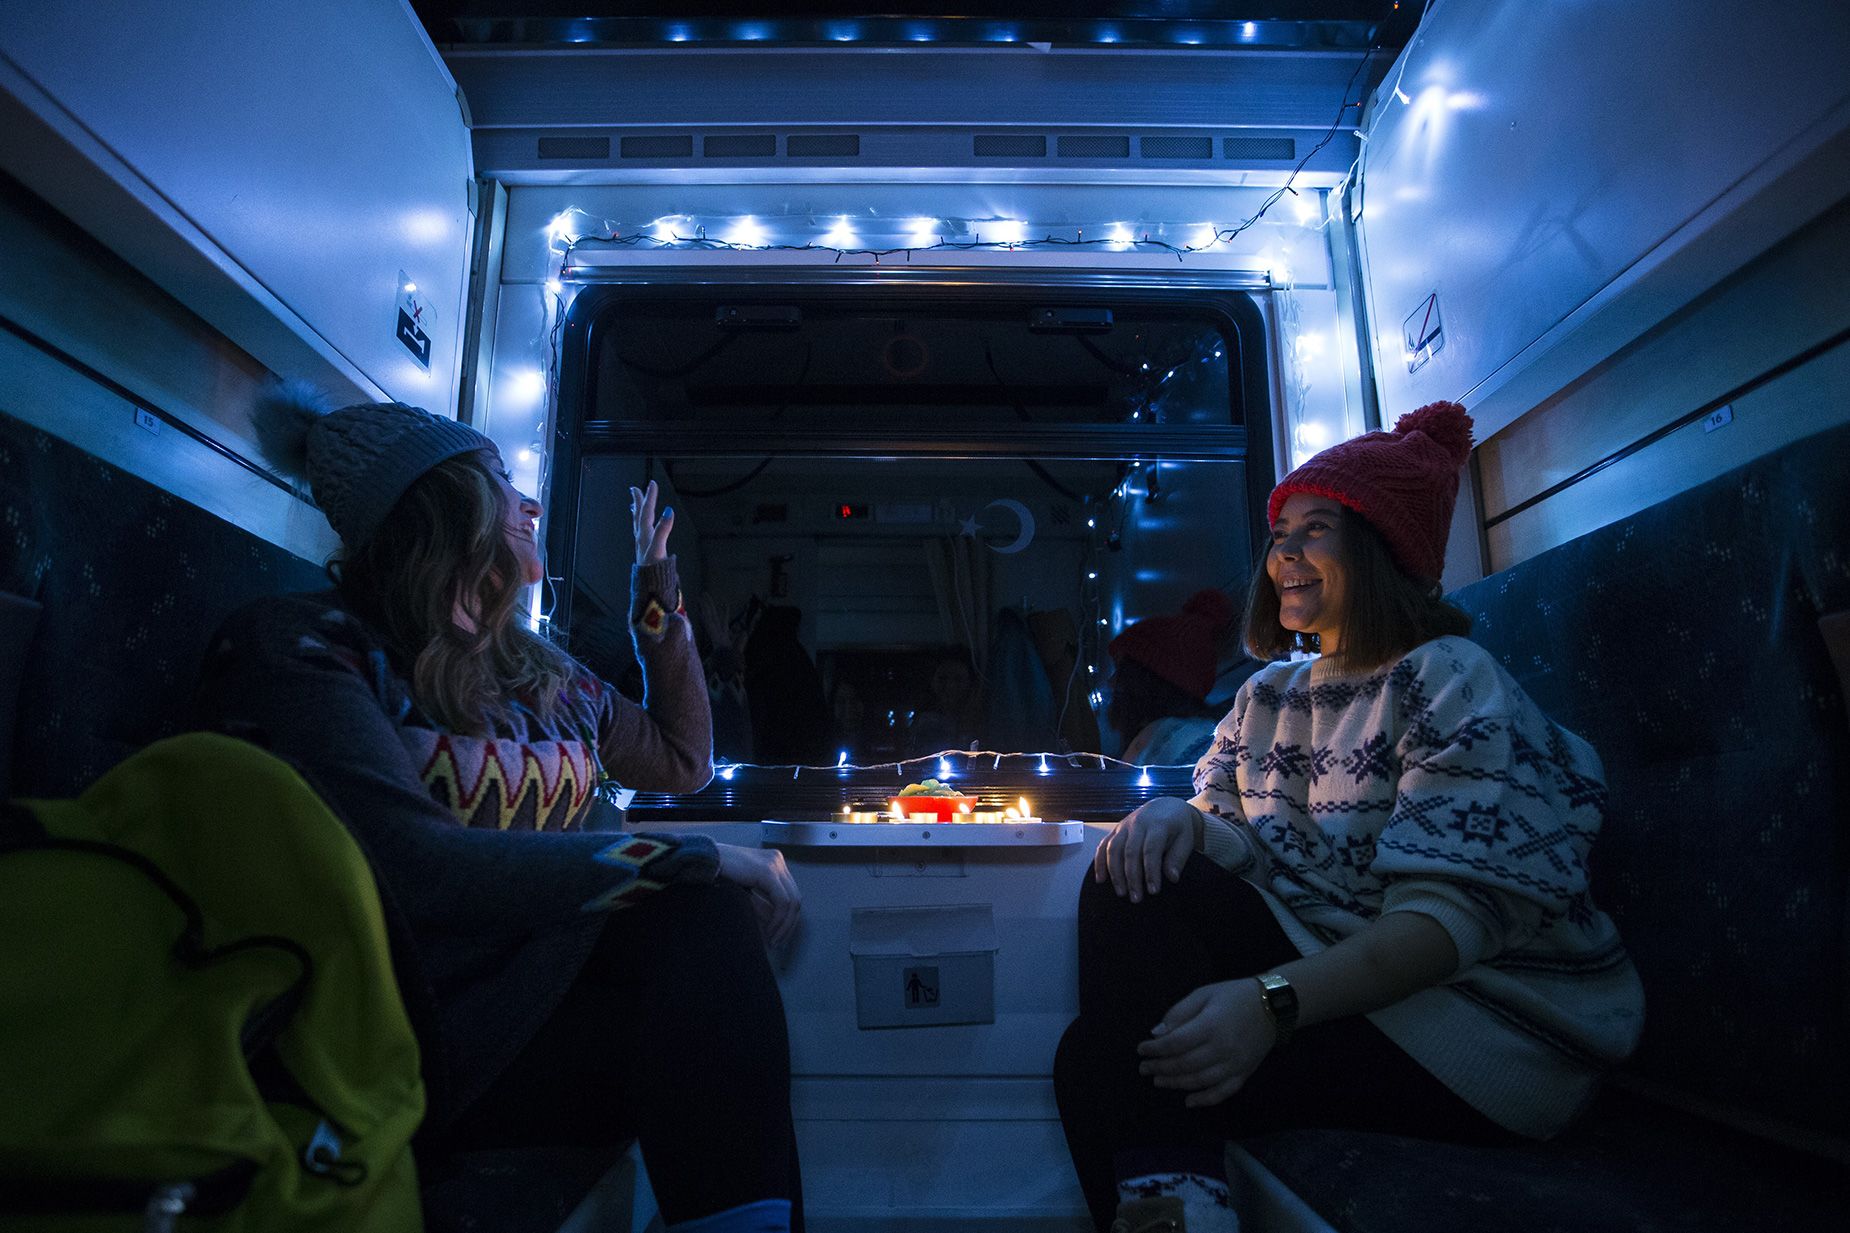 Travelers often decorate their cabins with strings of lights and candles.  (Mustafa Kamachi/Anadolu Agency/Getty Images)